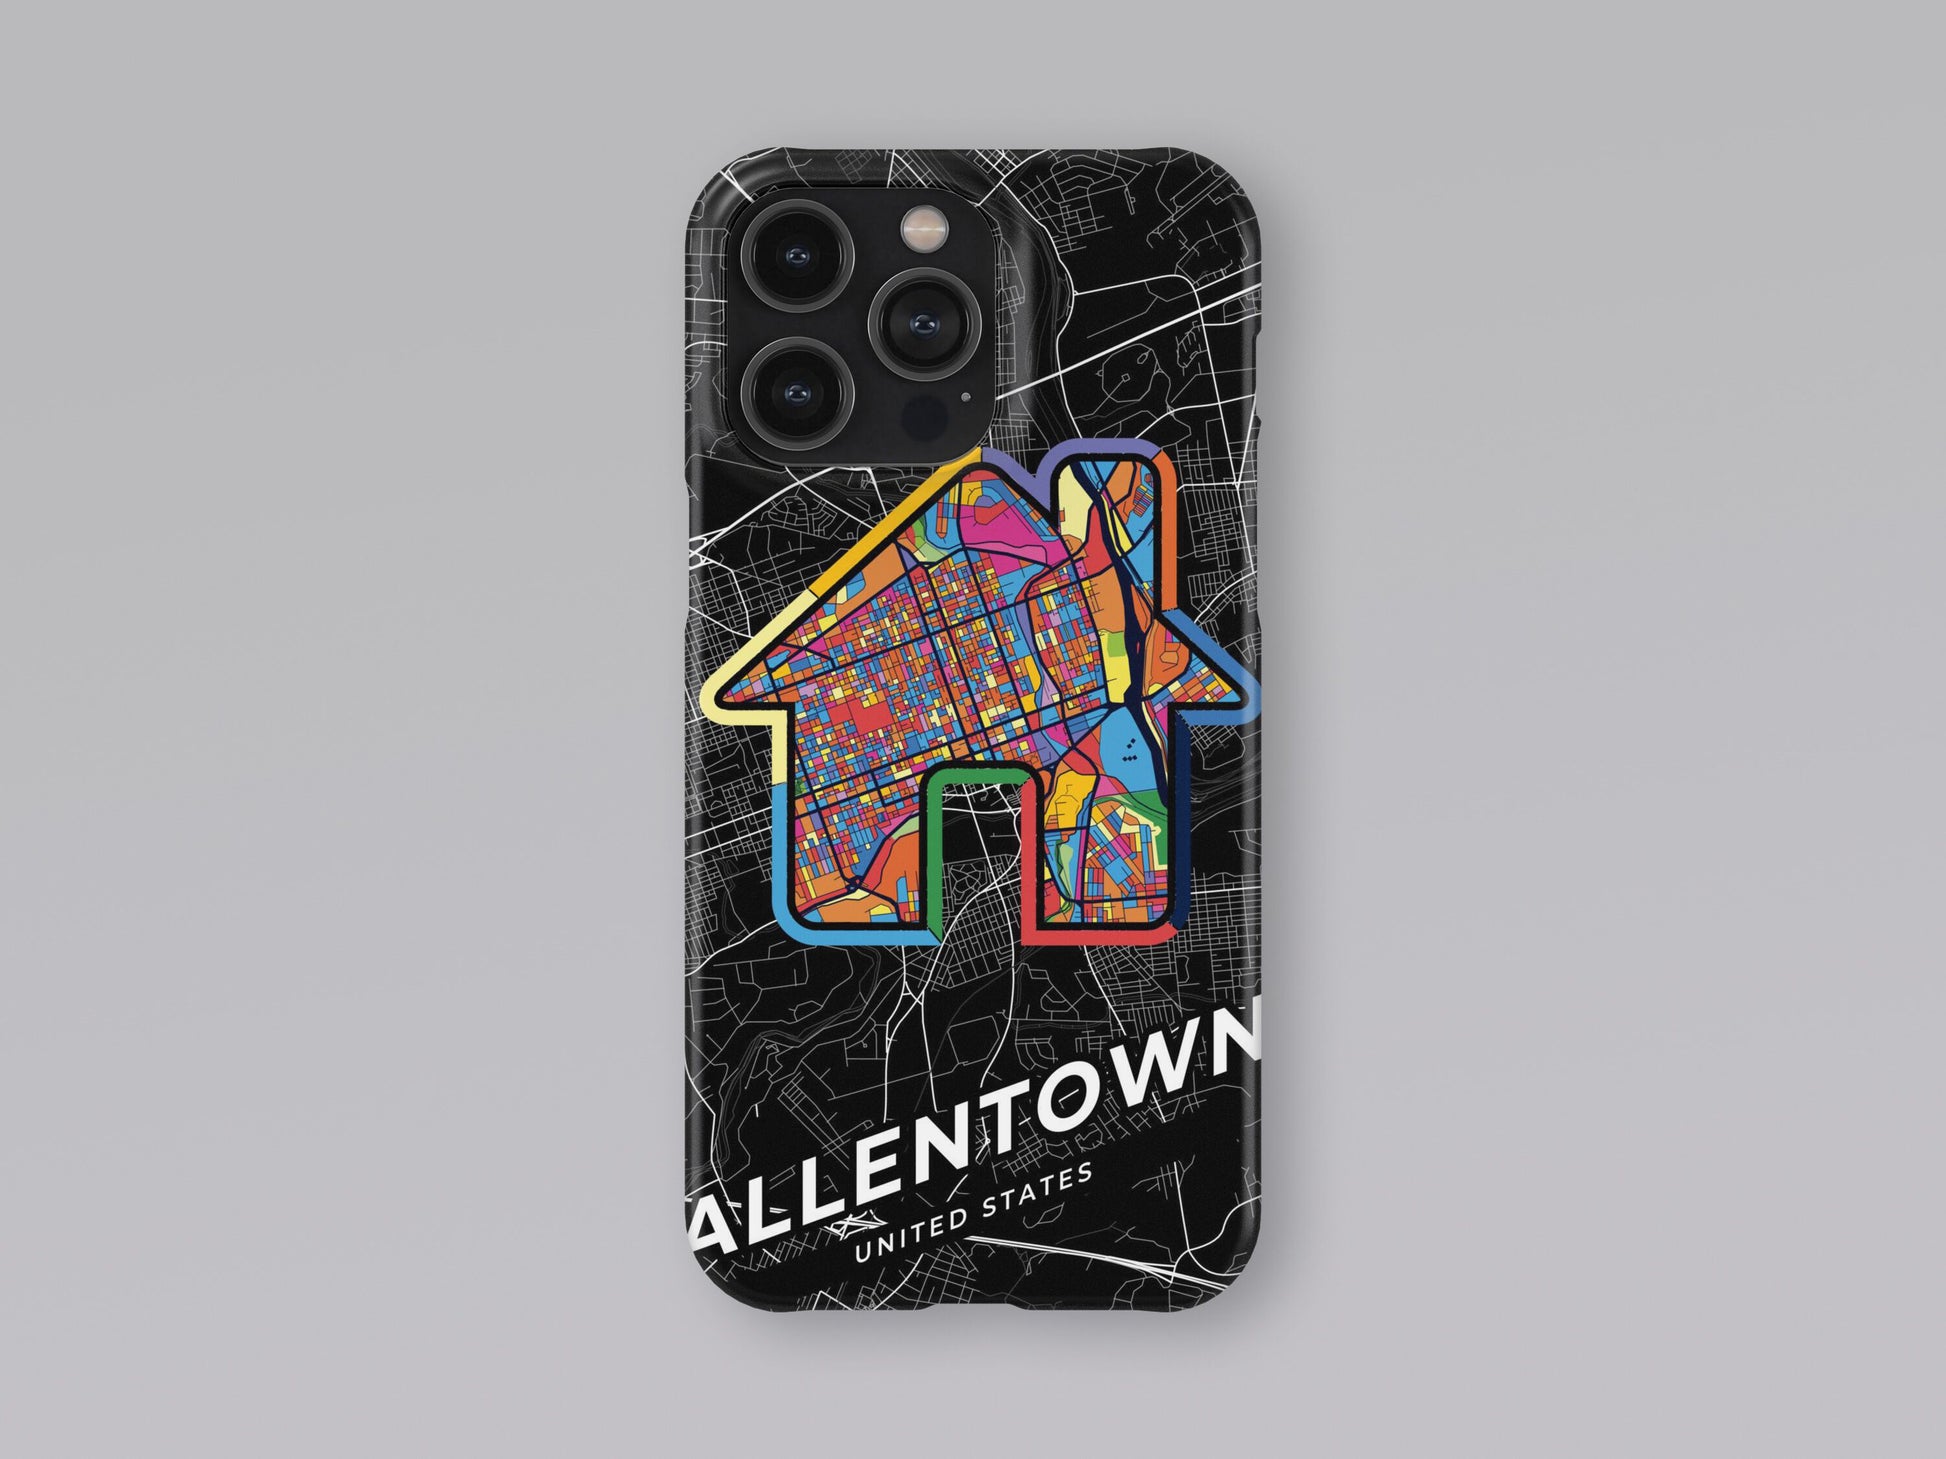 Allentown Pennsylvania slim phone case with colorful icon. Birthday, wedding or housewarming gift. Couple match cases. 3